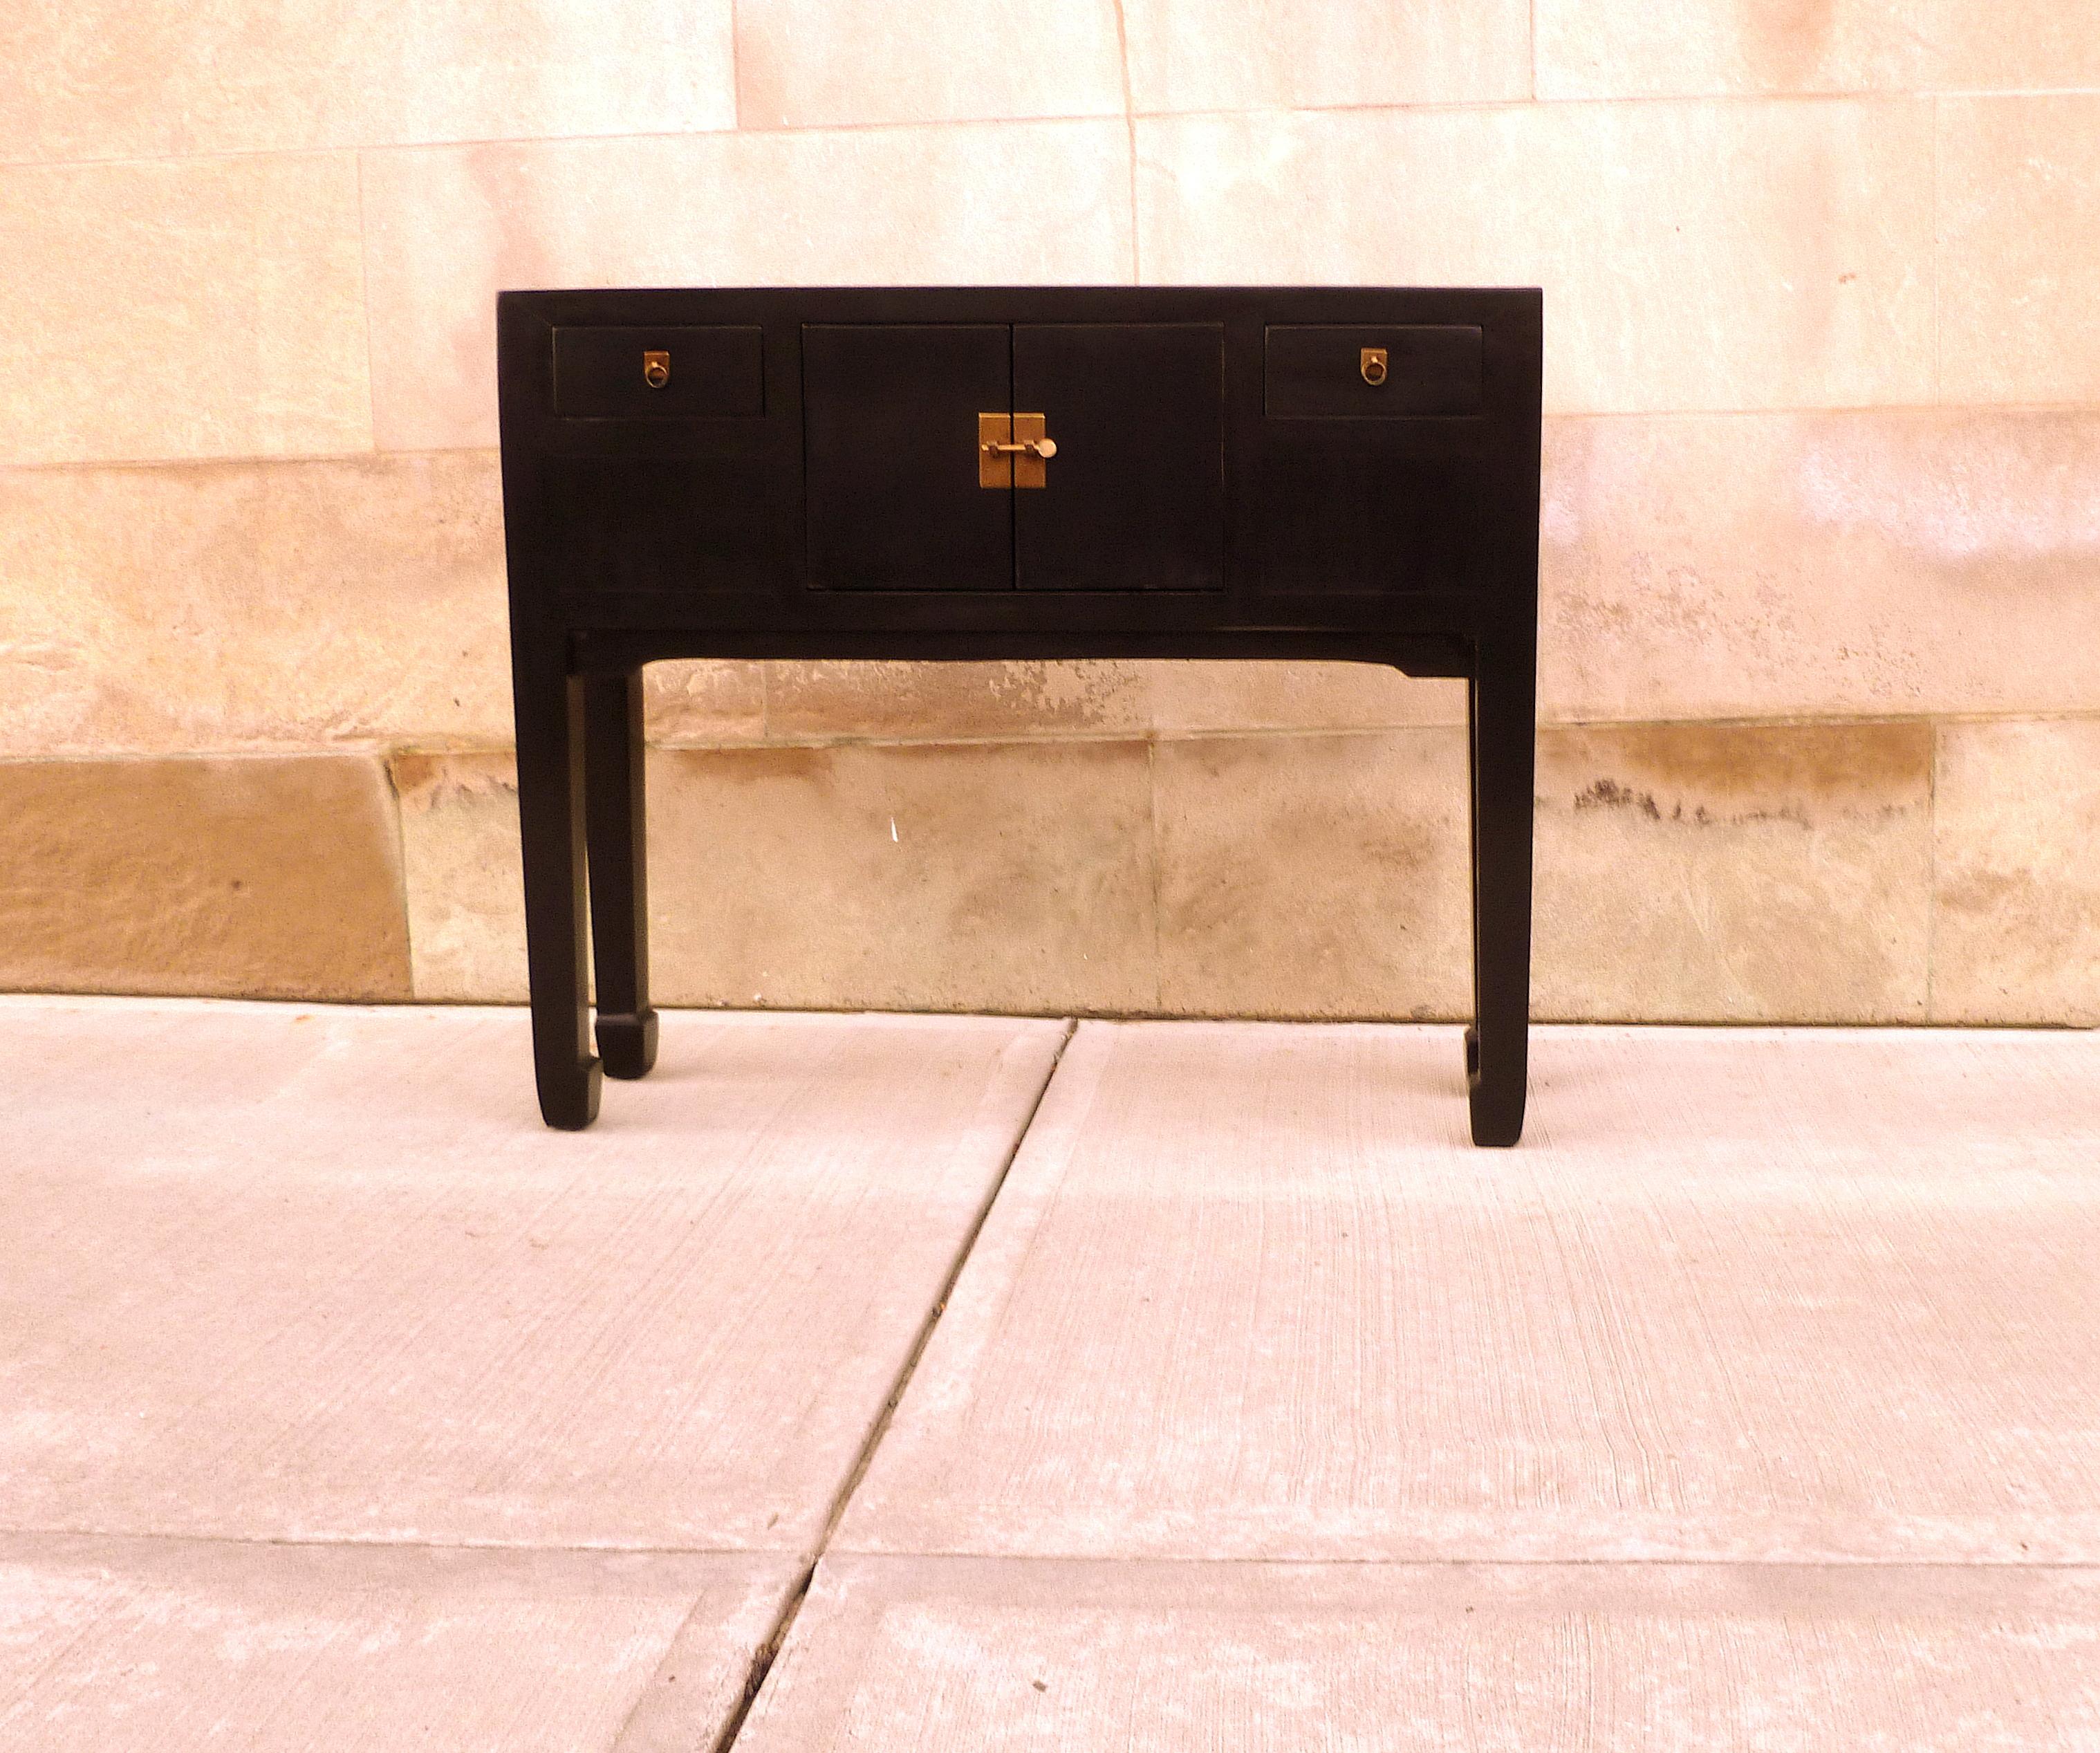 Fine black lacquer console table, very elegant, simple form and beautiful color. We carry fine quality furniture with elegant finished and has been appeared many times in 